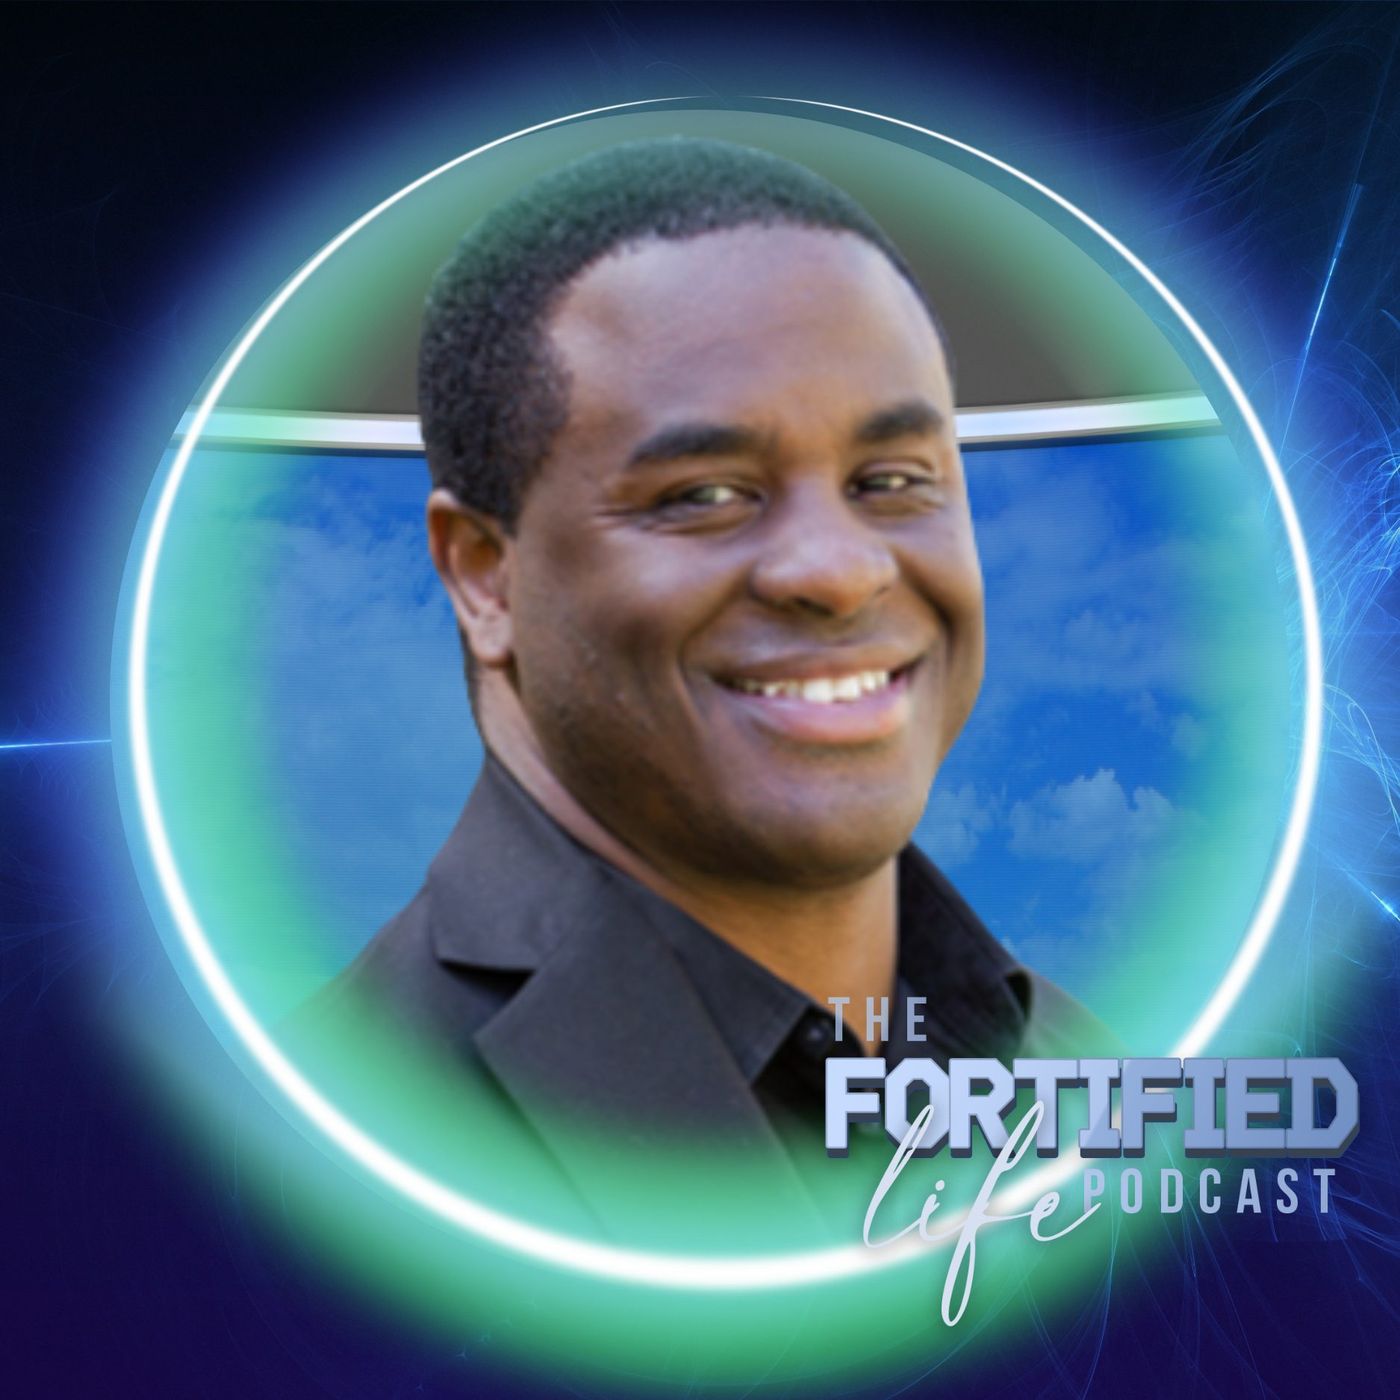 The Fortified Life Podcast with Jason Davis - EP 133 | Topic & Lesson - Identity Theft: The Enemy's Goal to Derail Your Purpose